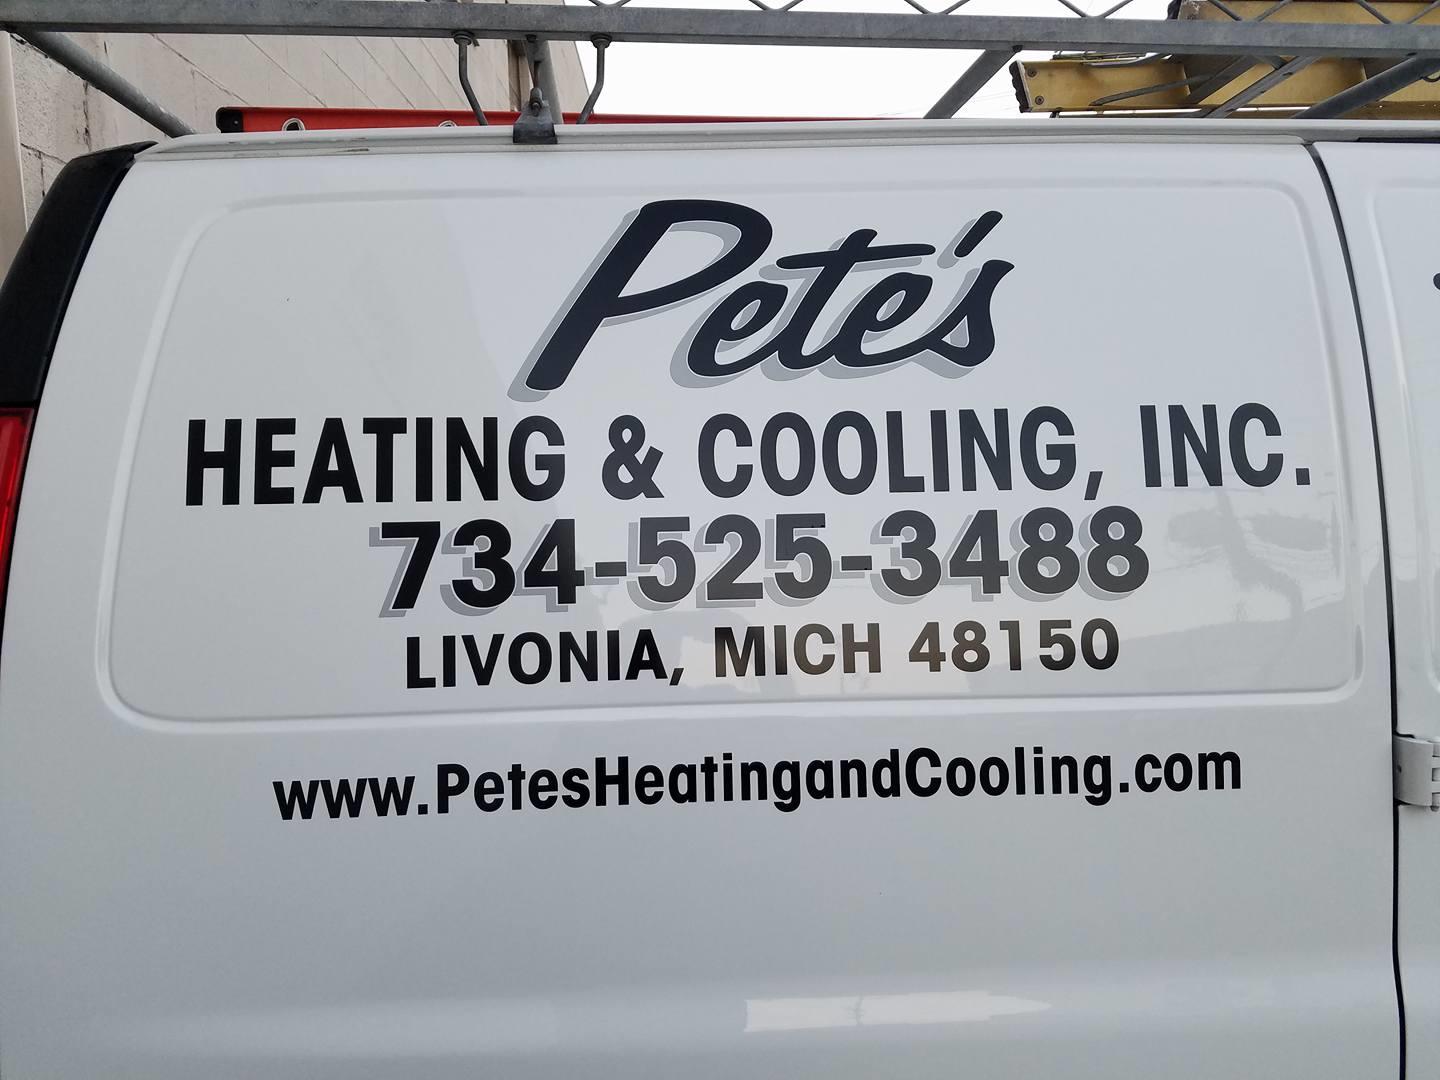 Pete's Heating & Cooling, Inc Photo